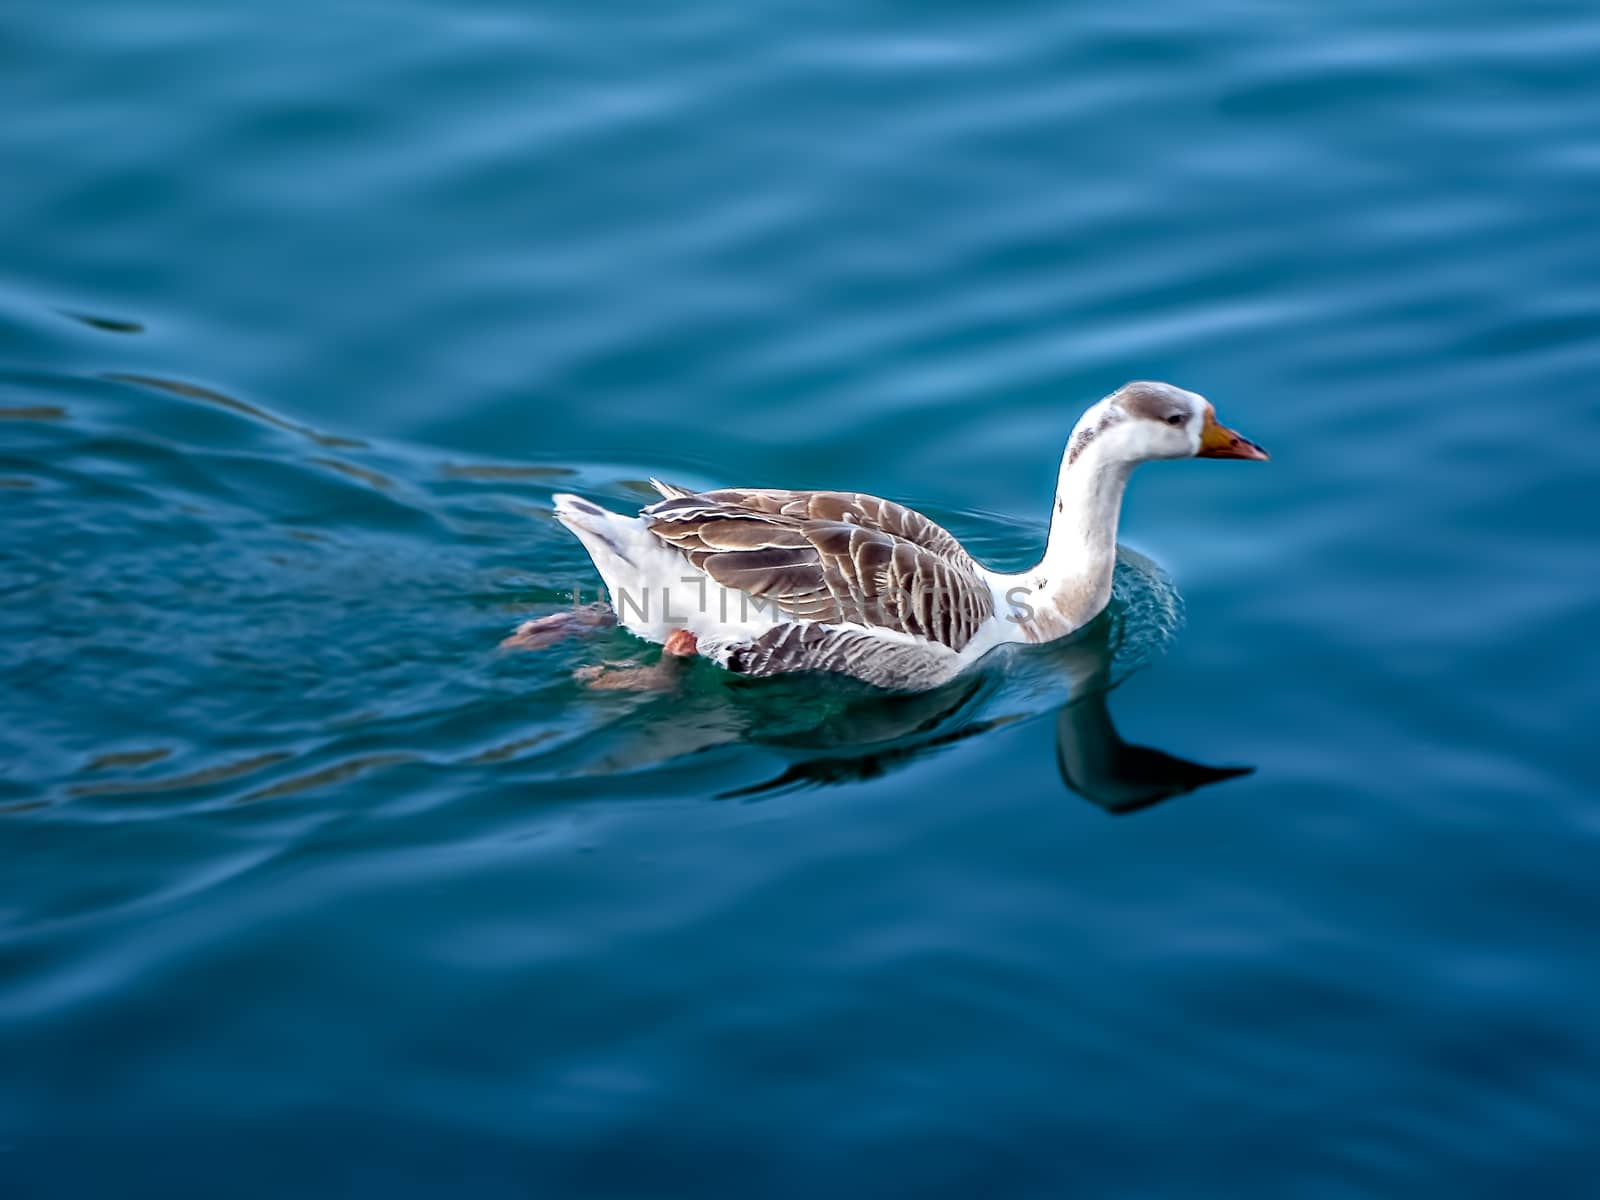 Making a reflection, single duck swimming in calm blue waters of lake in Nainital, India.